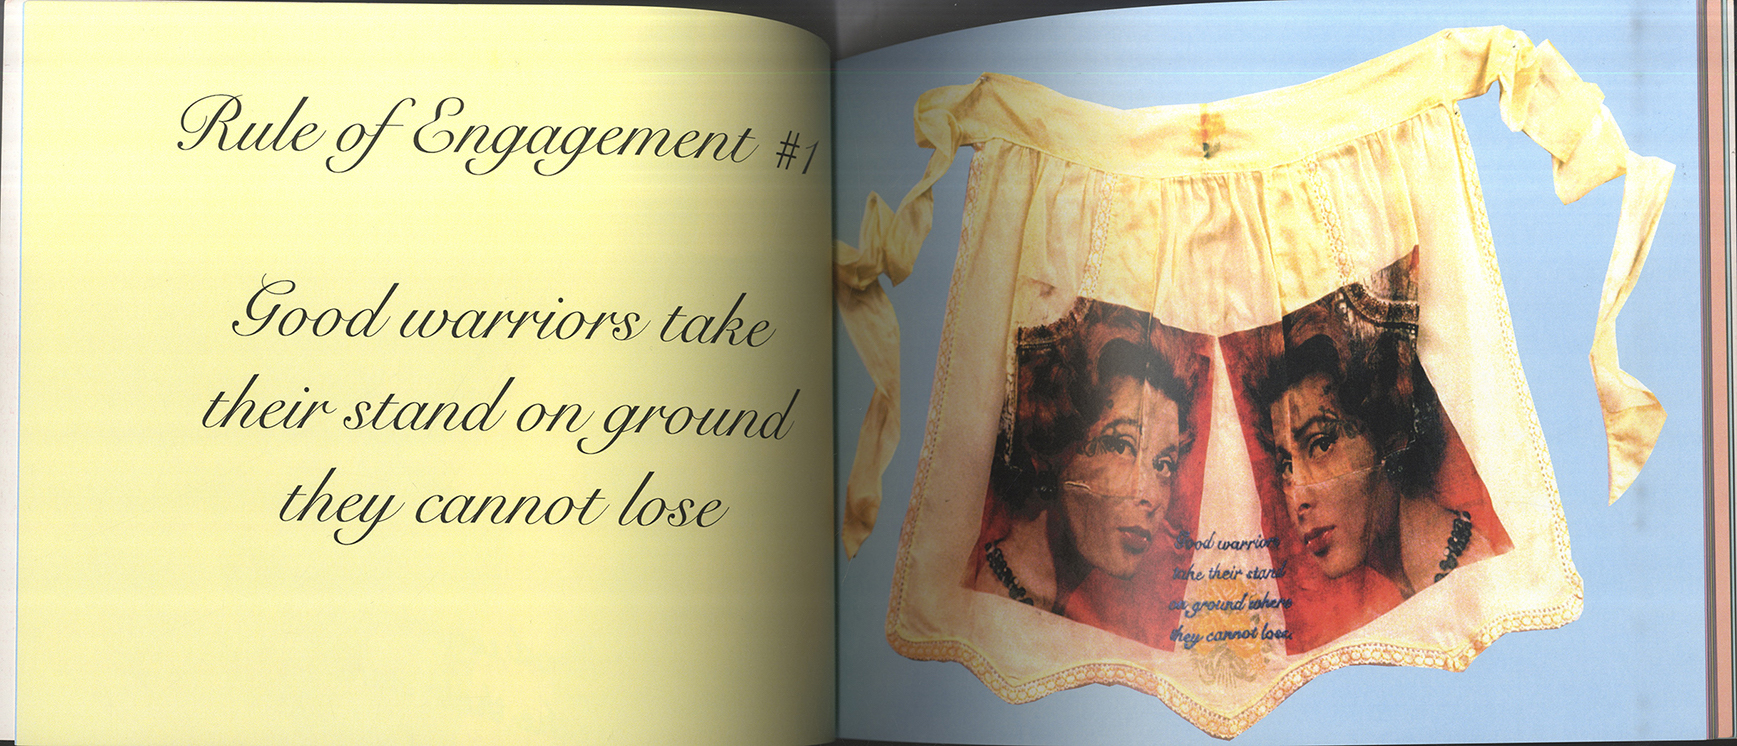 Pages from Rules of engagement by Miriam Schaer